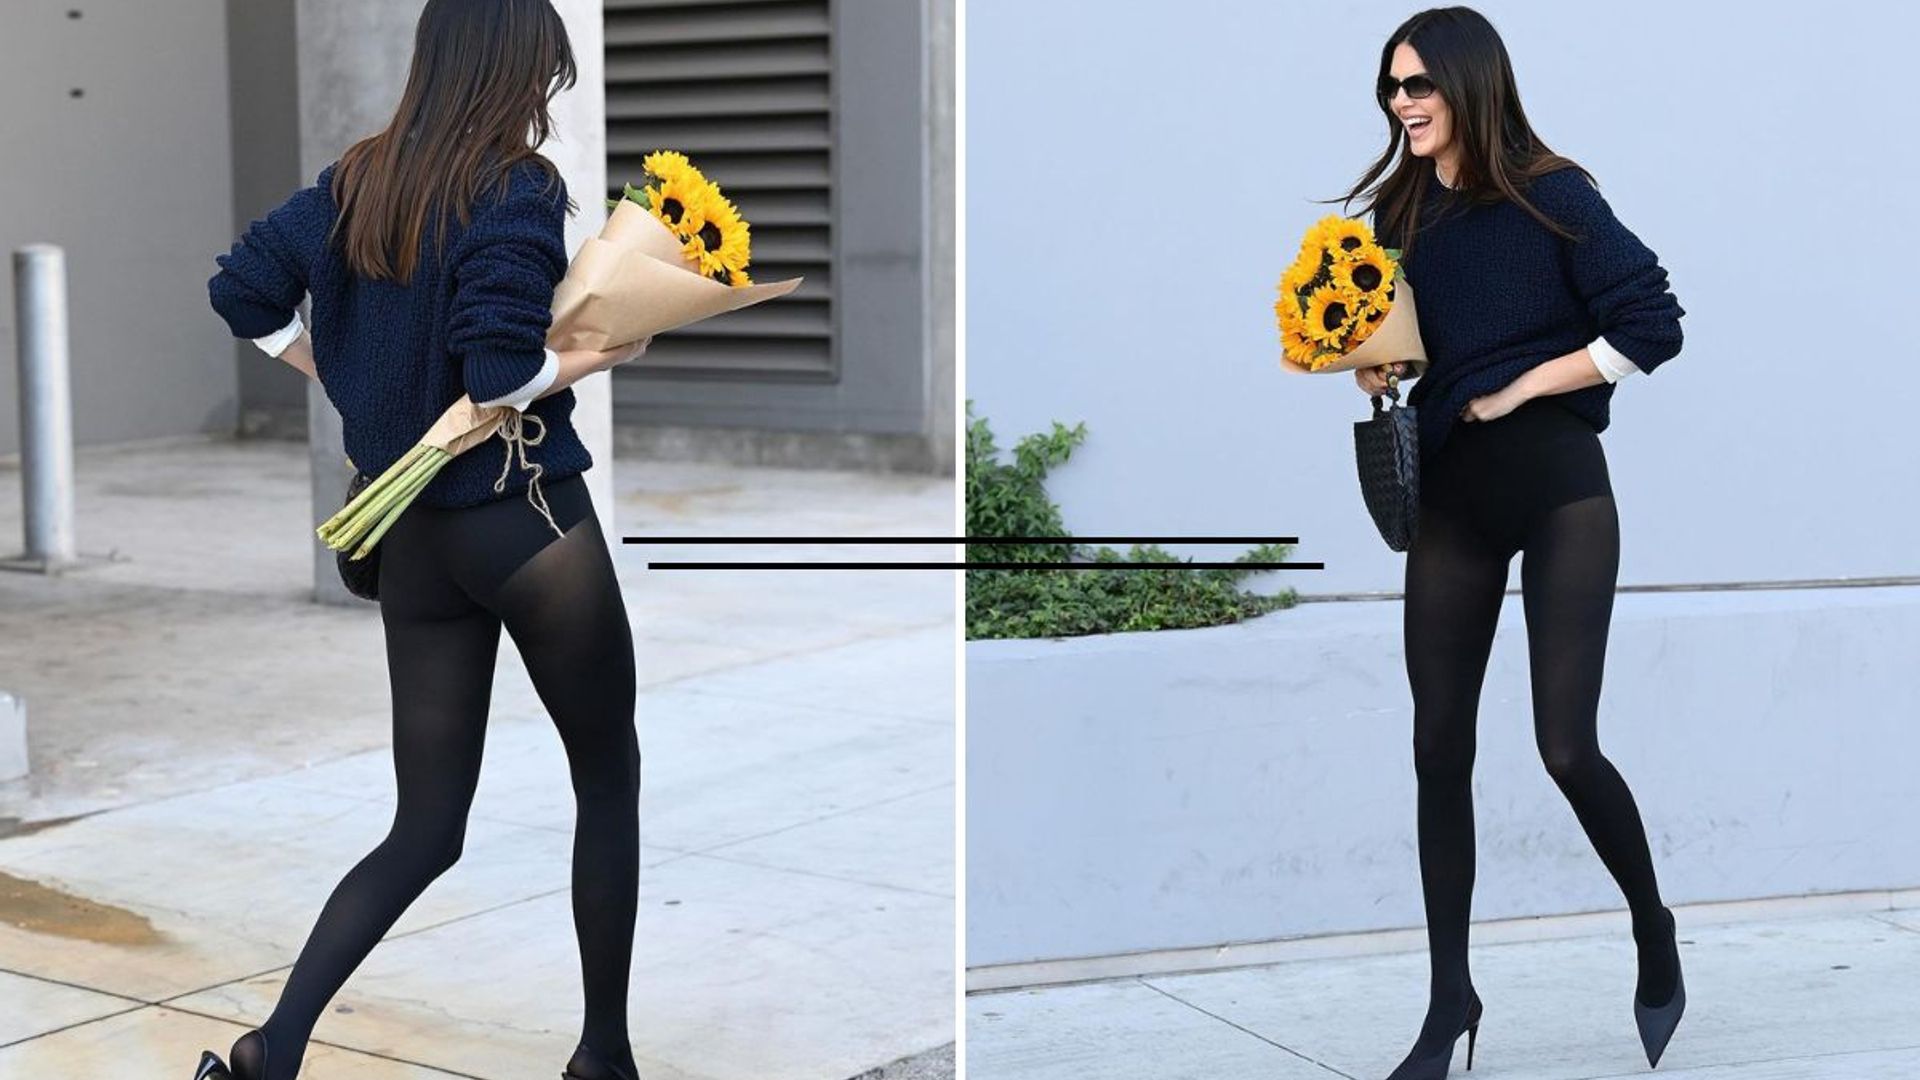 Kendall Jenner's micro-shorts are the winter fashion statement of 2022